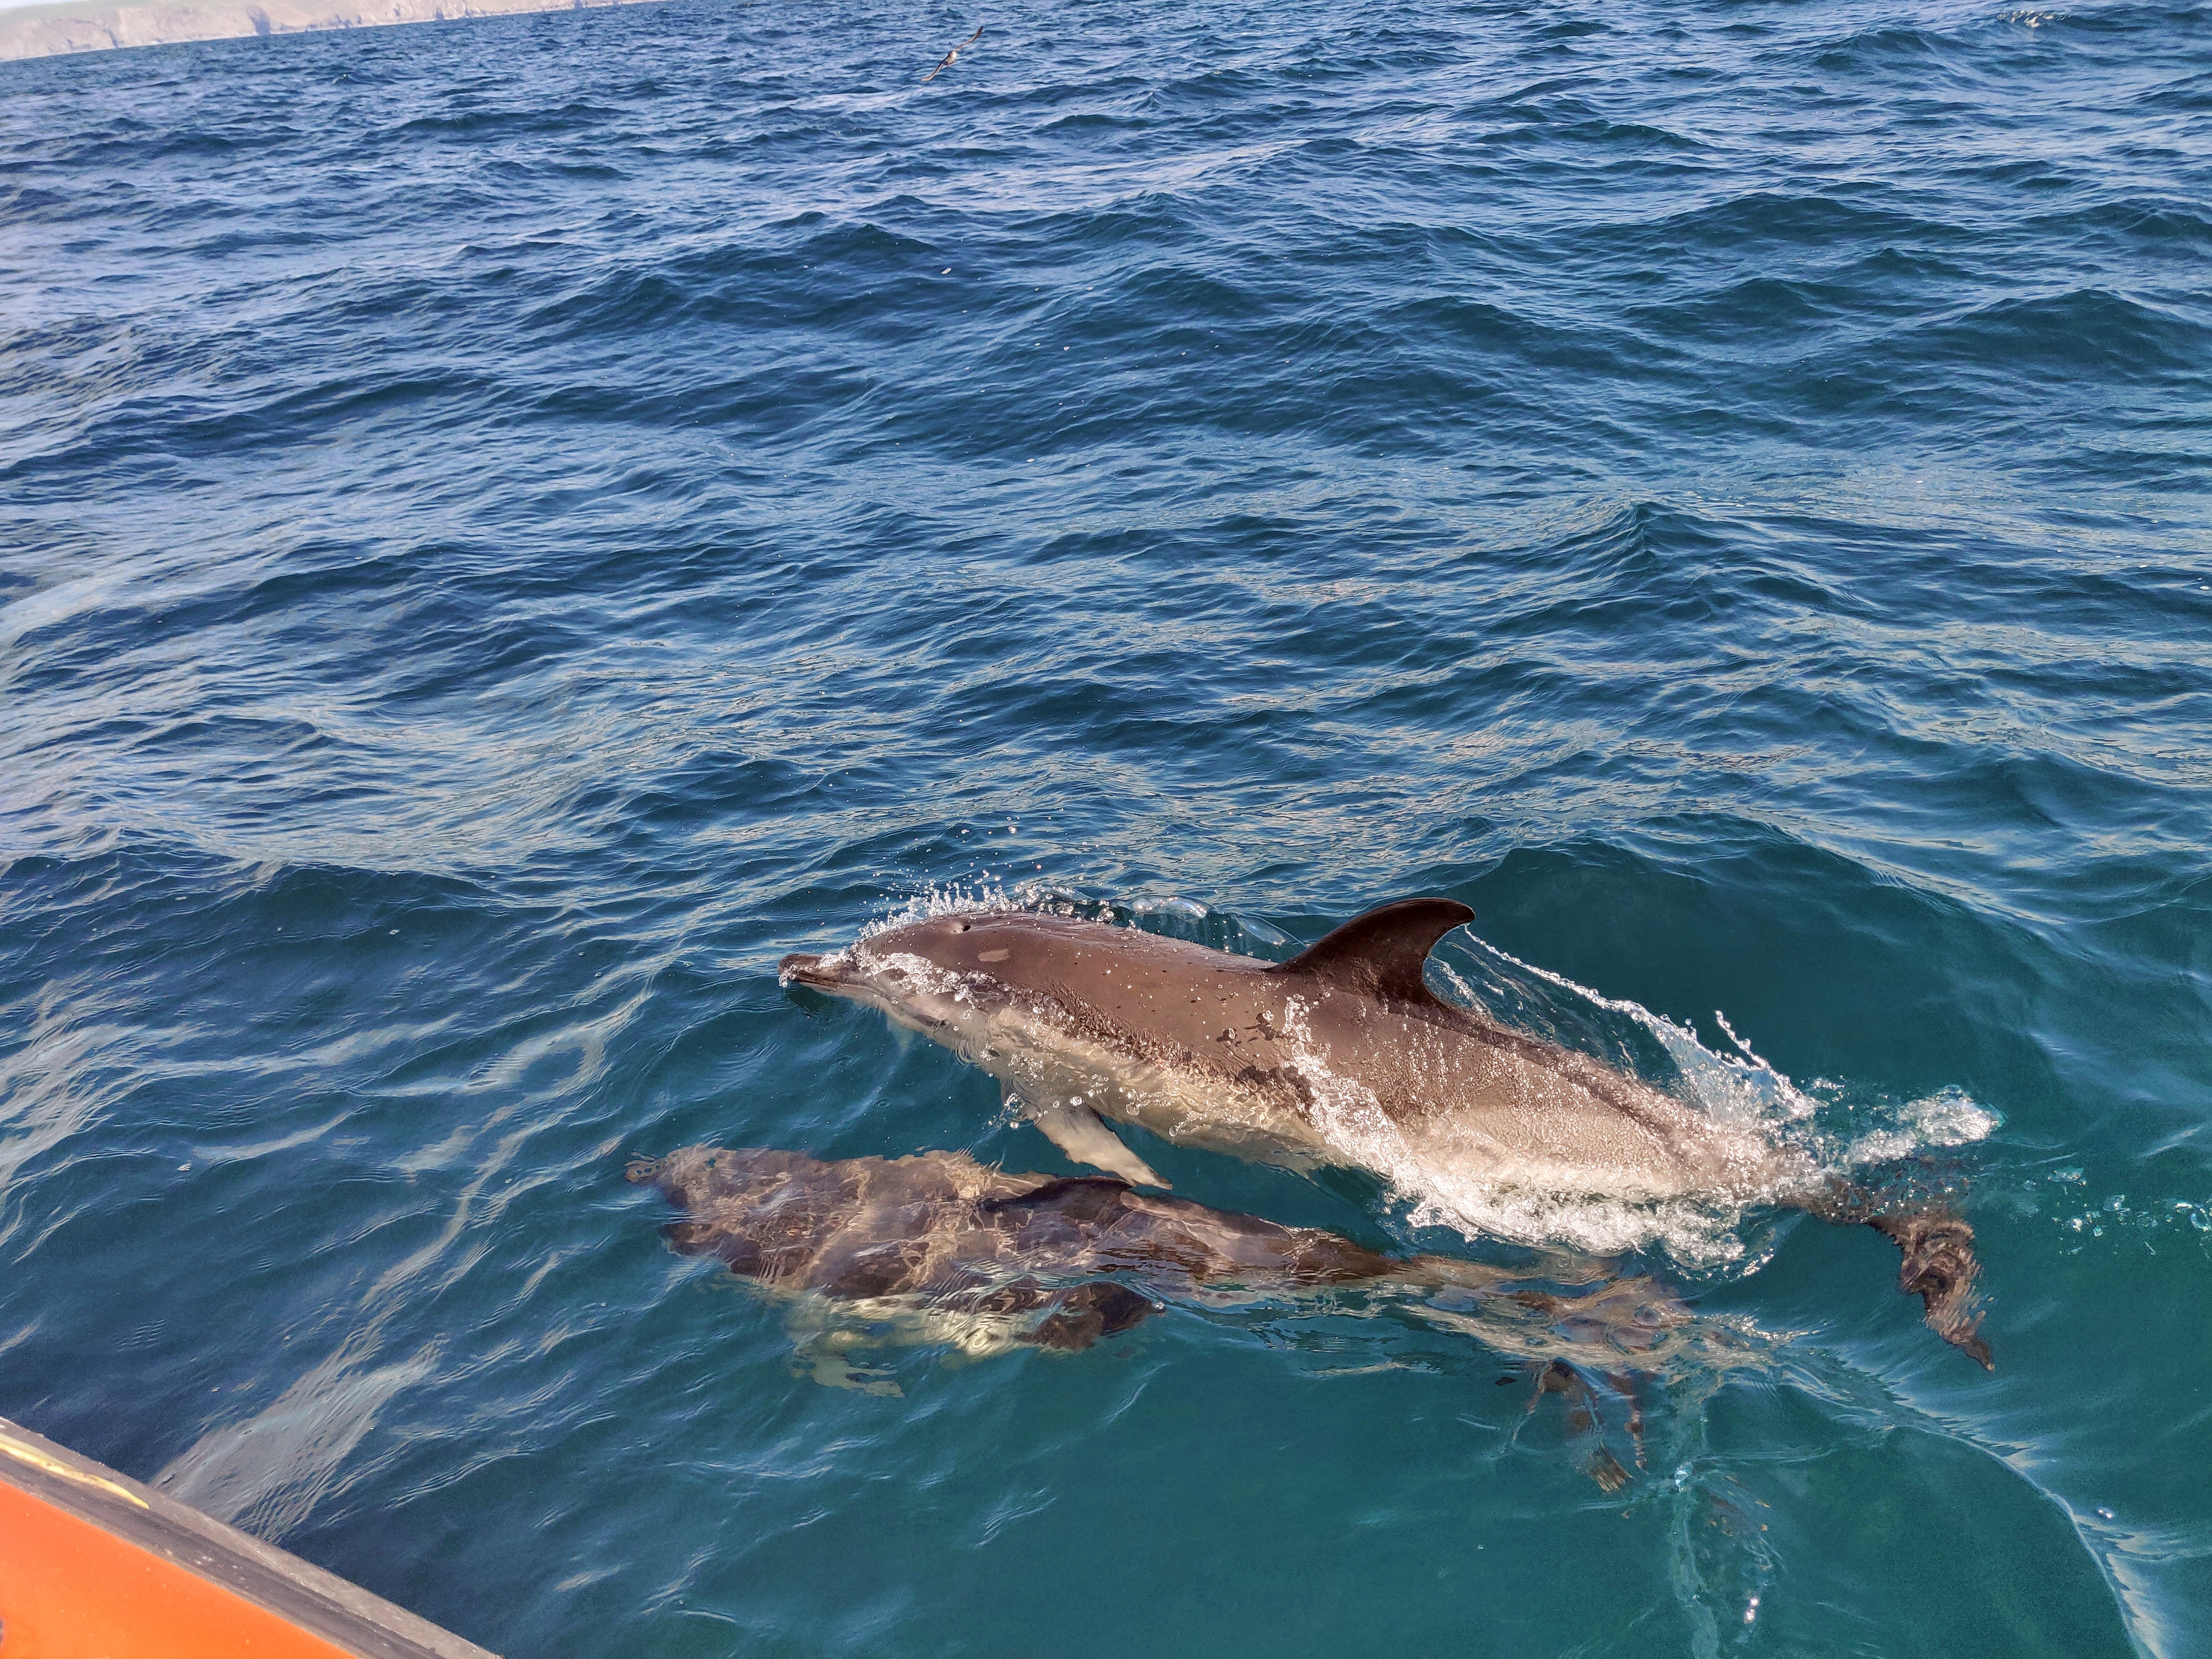 &ldquo;2 common dolphins swimming alongside the boat, one of them is breaking the surface with its fin&rdquo;